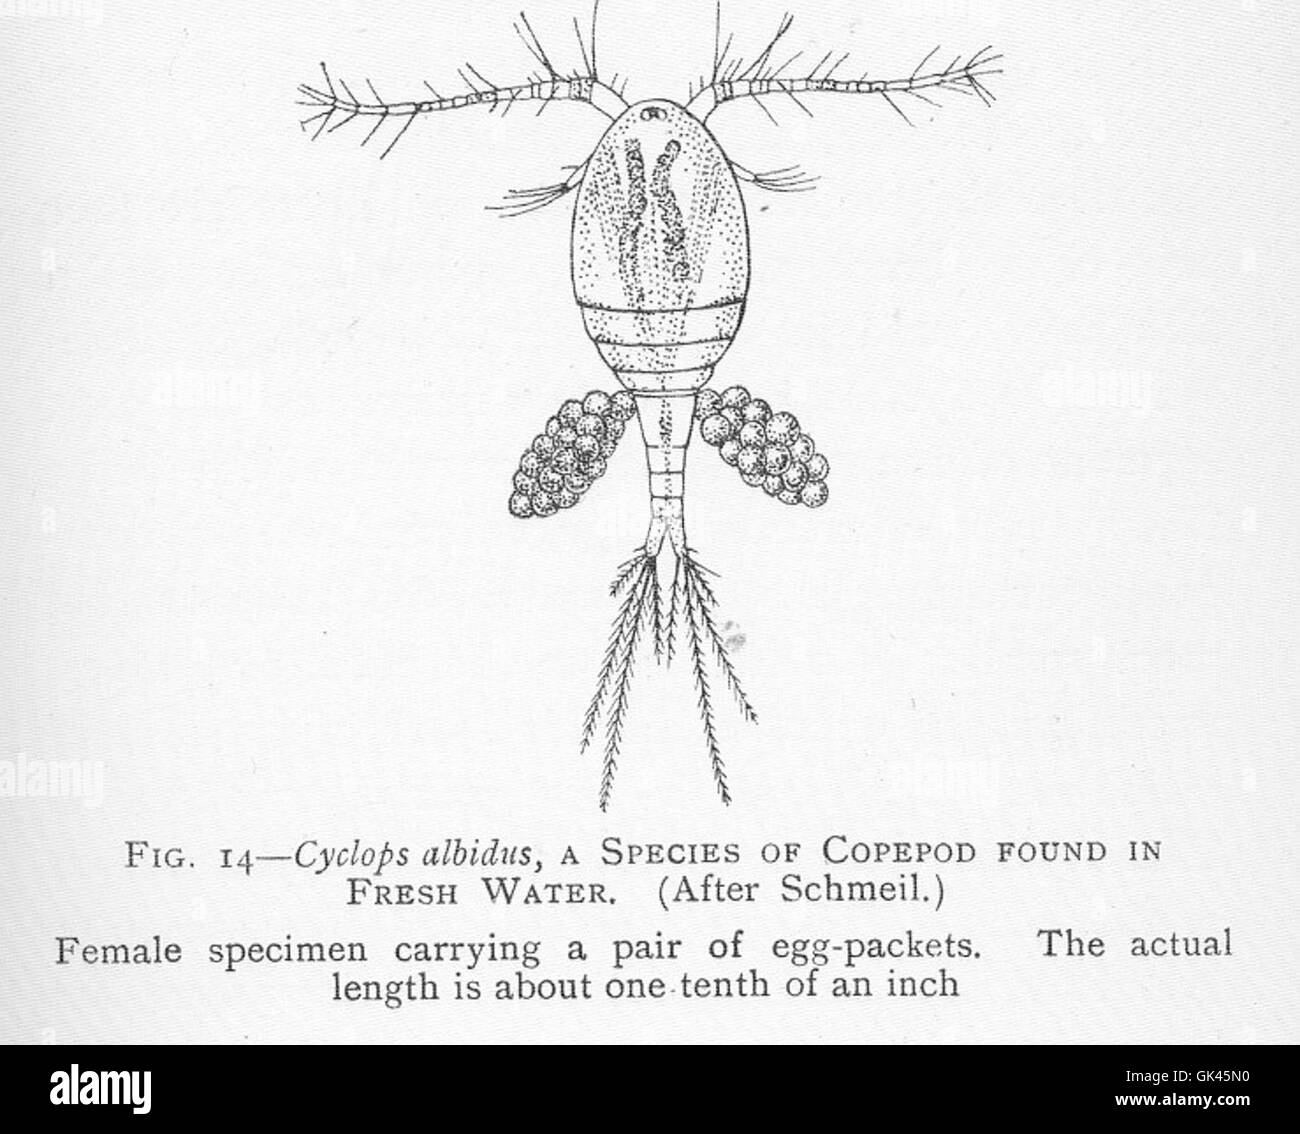 46399 Cyclops albidus, a species of Copepod founr in fresh water Stock Photo